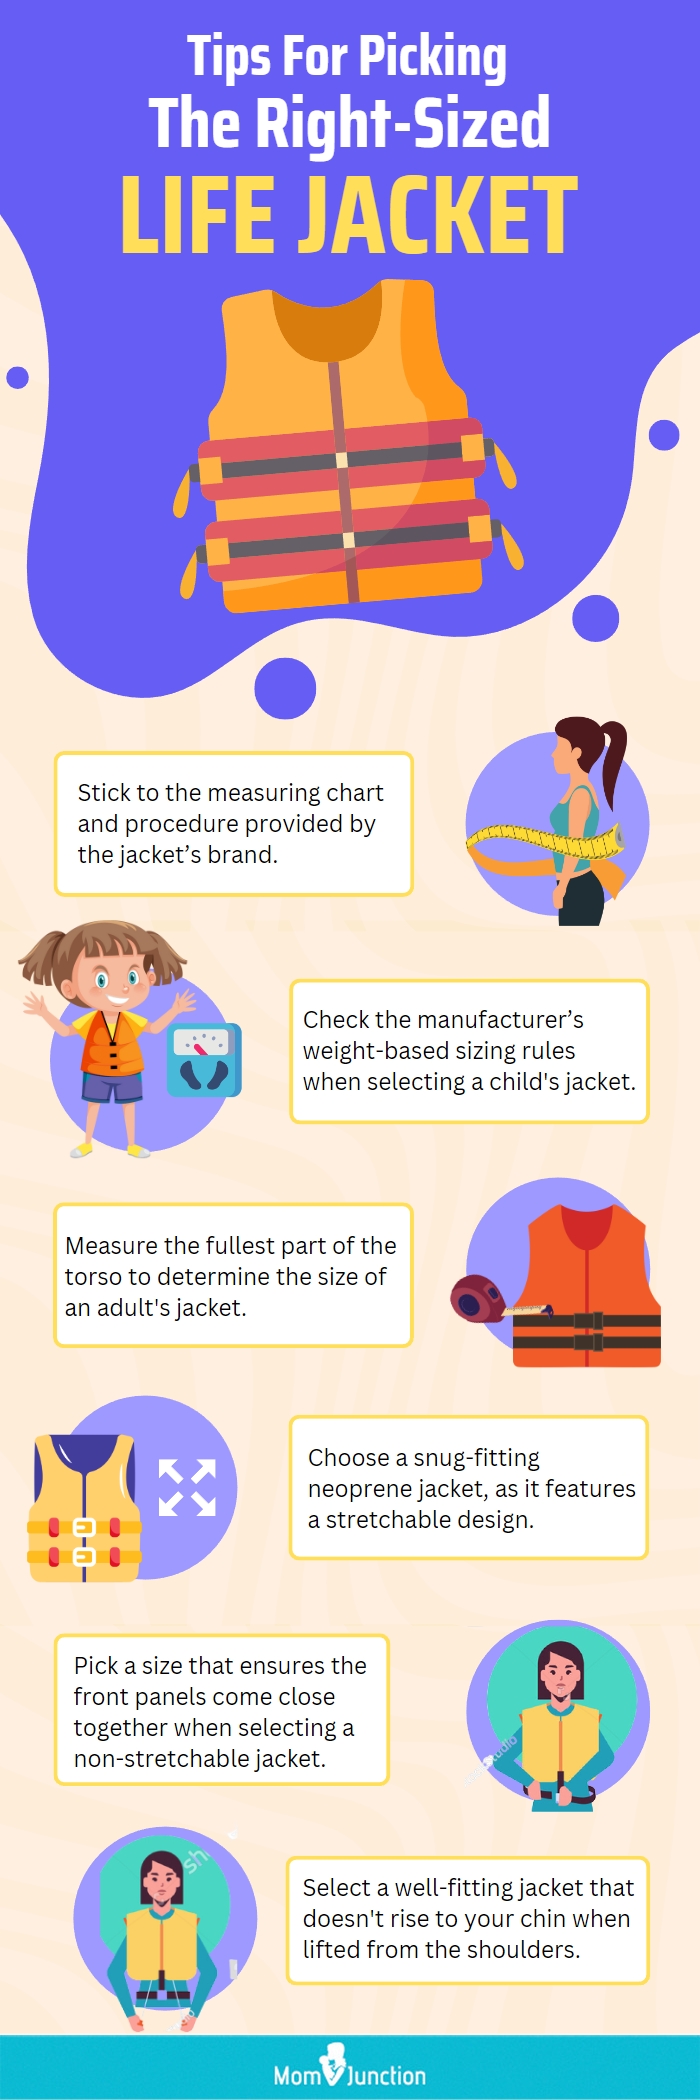 Tips For Picking The Right Sized Life Jacket (infographic)